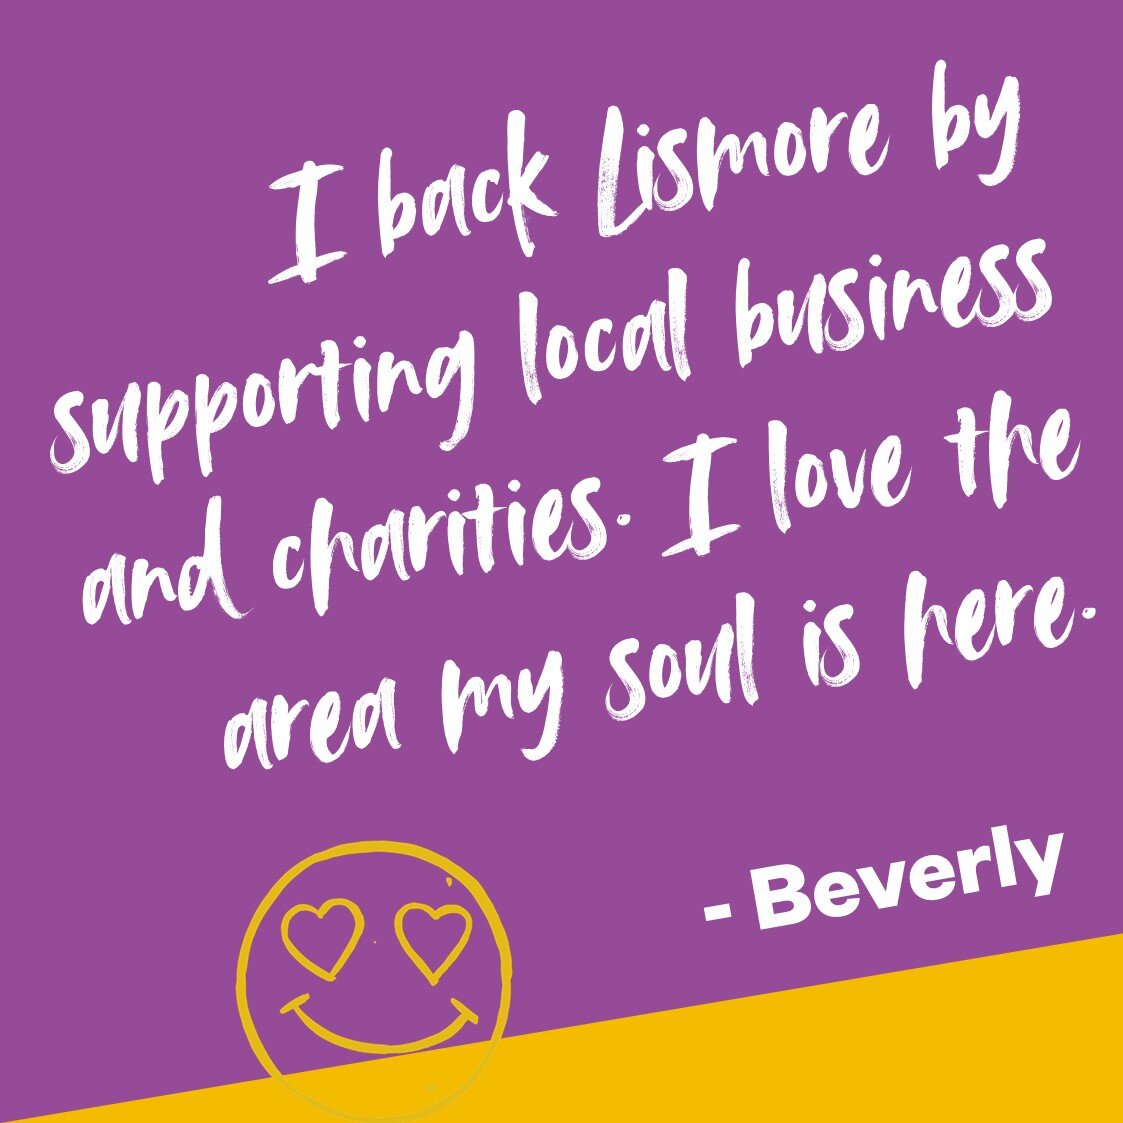 We love hearing all the ways our community members like Beverly are backing Lismore. How about you? Tag you favourite local business or charity below! 

For more inspiration on how to back Lismore, go to www.backlismore.com.au. 
#BackLismore #VisitLi